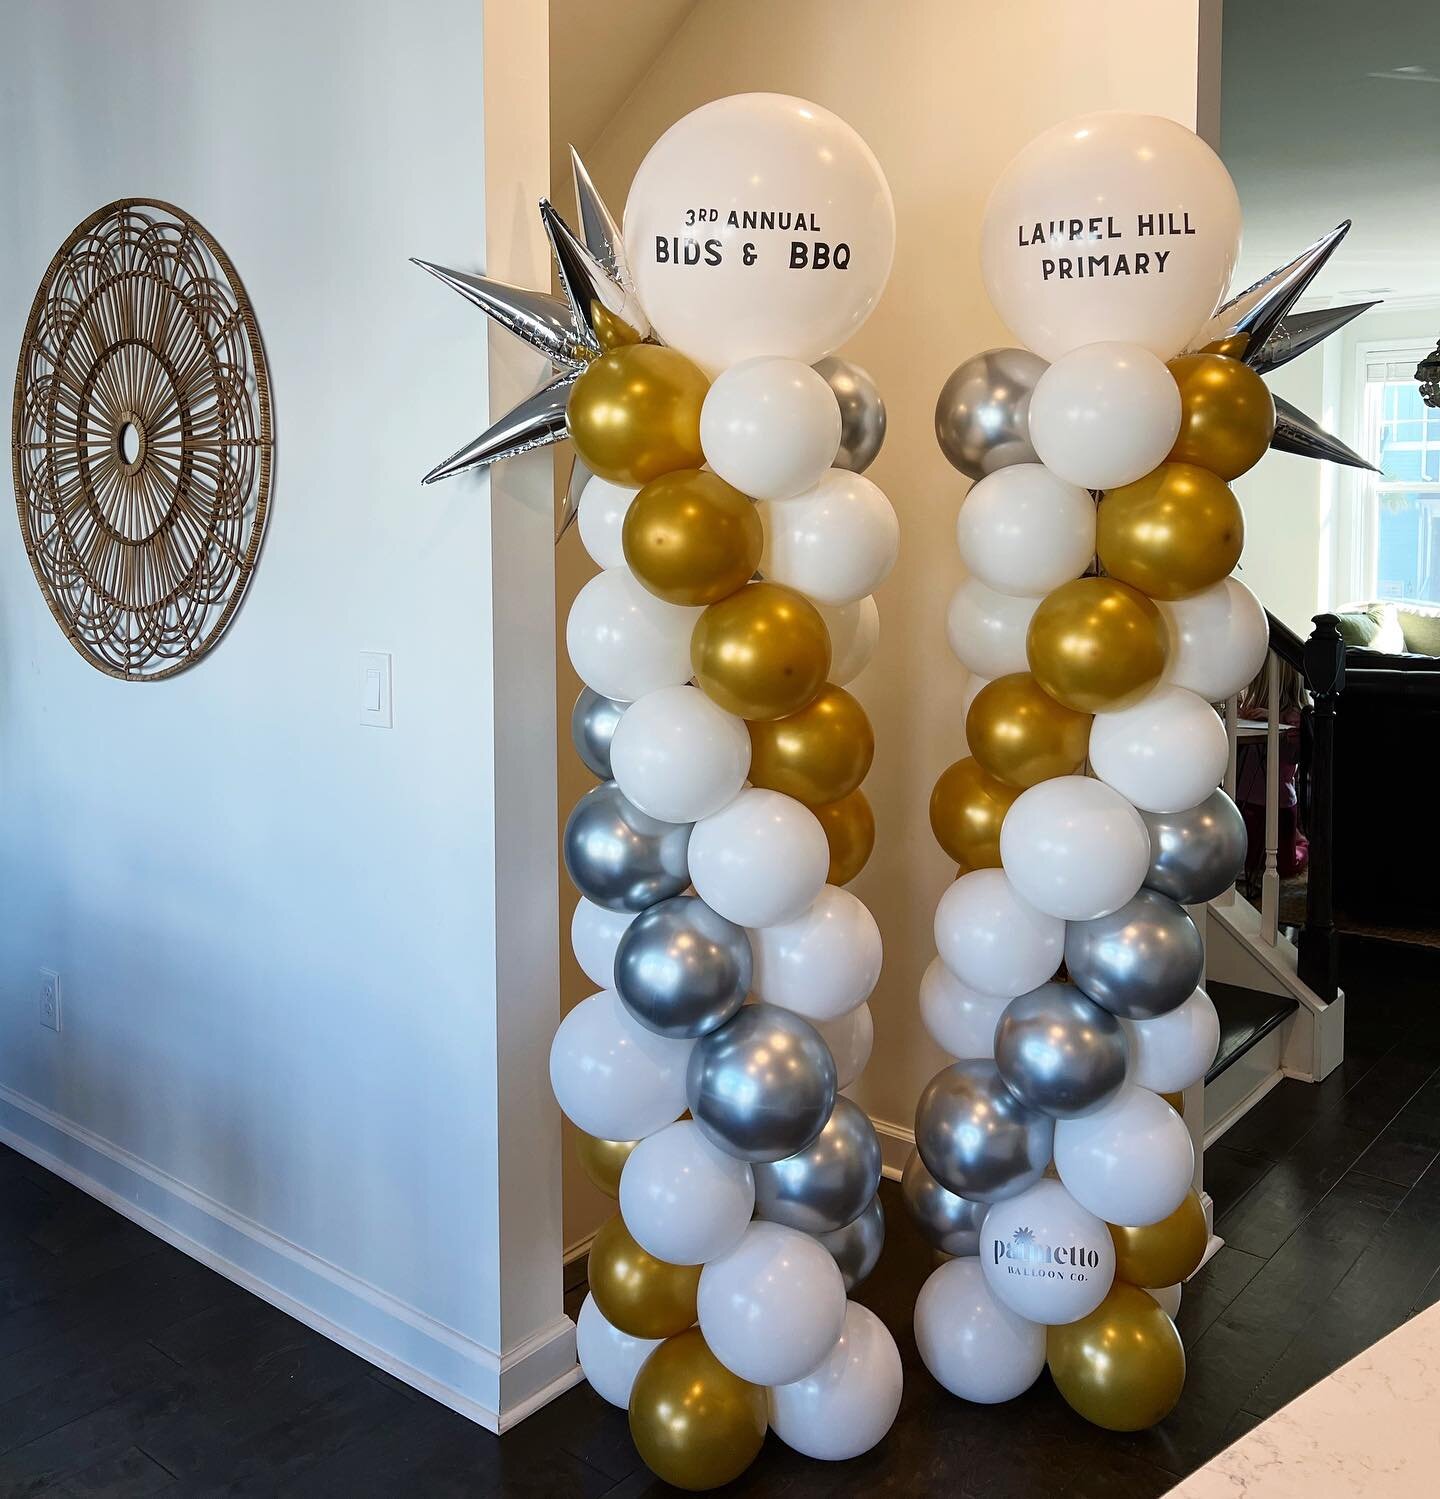 Some traditional columns for a PTA event in Mount Pleasant! 💛🤍🩶 #charlestonballooncompany #charlestonballoons #mtpleasantballoons #mtpleasantballoondecor